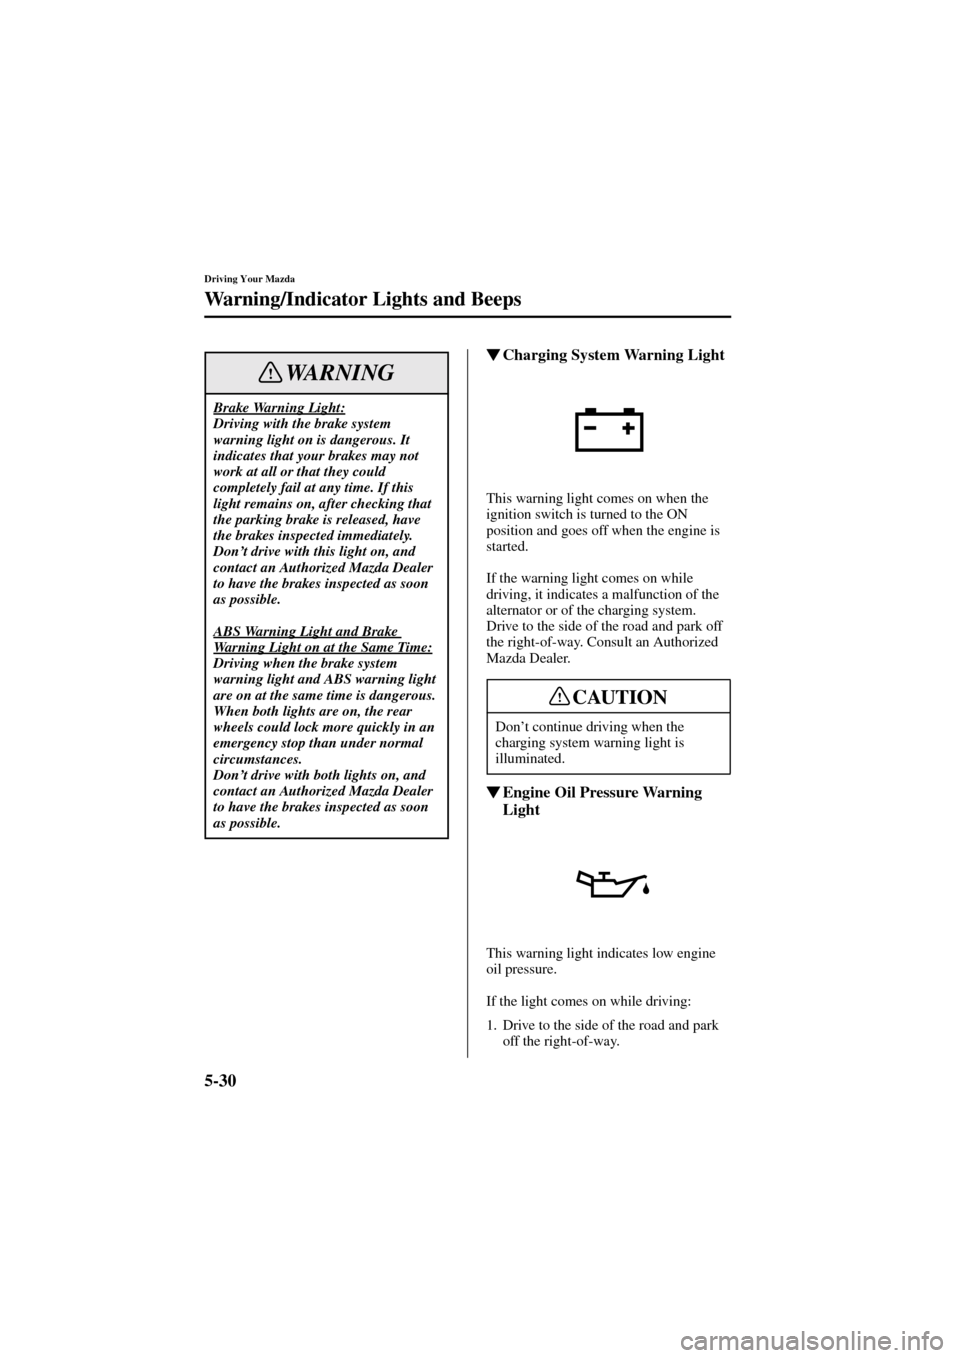 MAZDA MODEL 6 2004   (in English) Owners Manual 5-30
Driving Your Mazda
Warning/Indicator Lights and Beeps
Form No. 8R29-EA-02I
Charging System Warning Light
This warning light comes on when the 
ignition switch is turned to the ON 
position and g